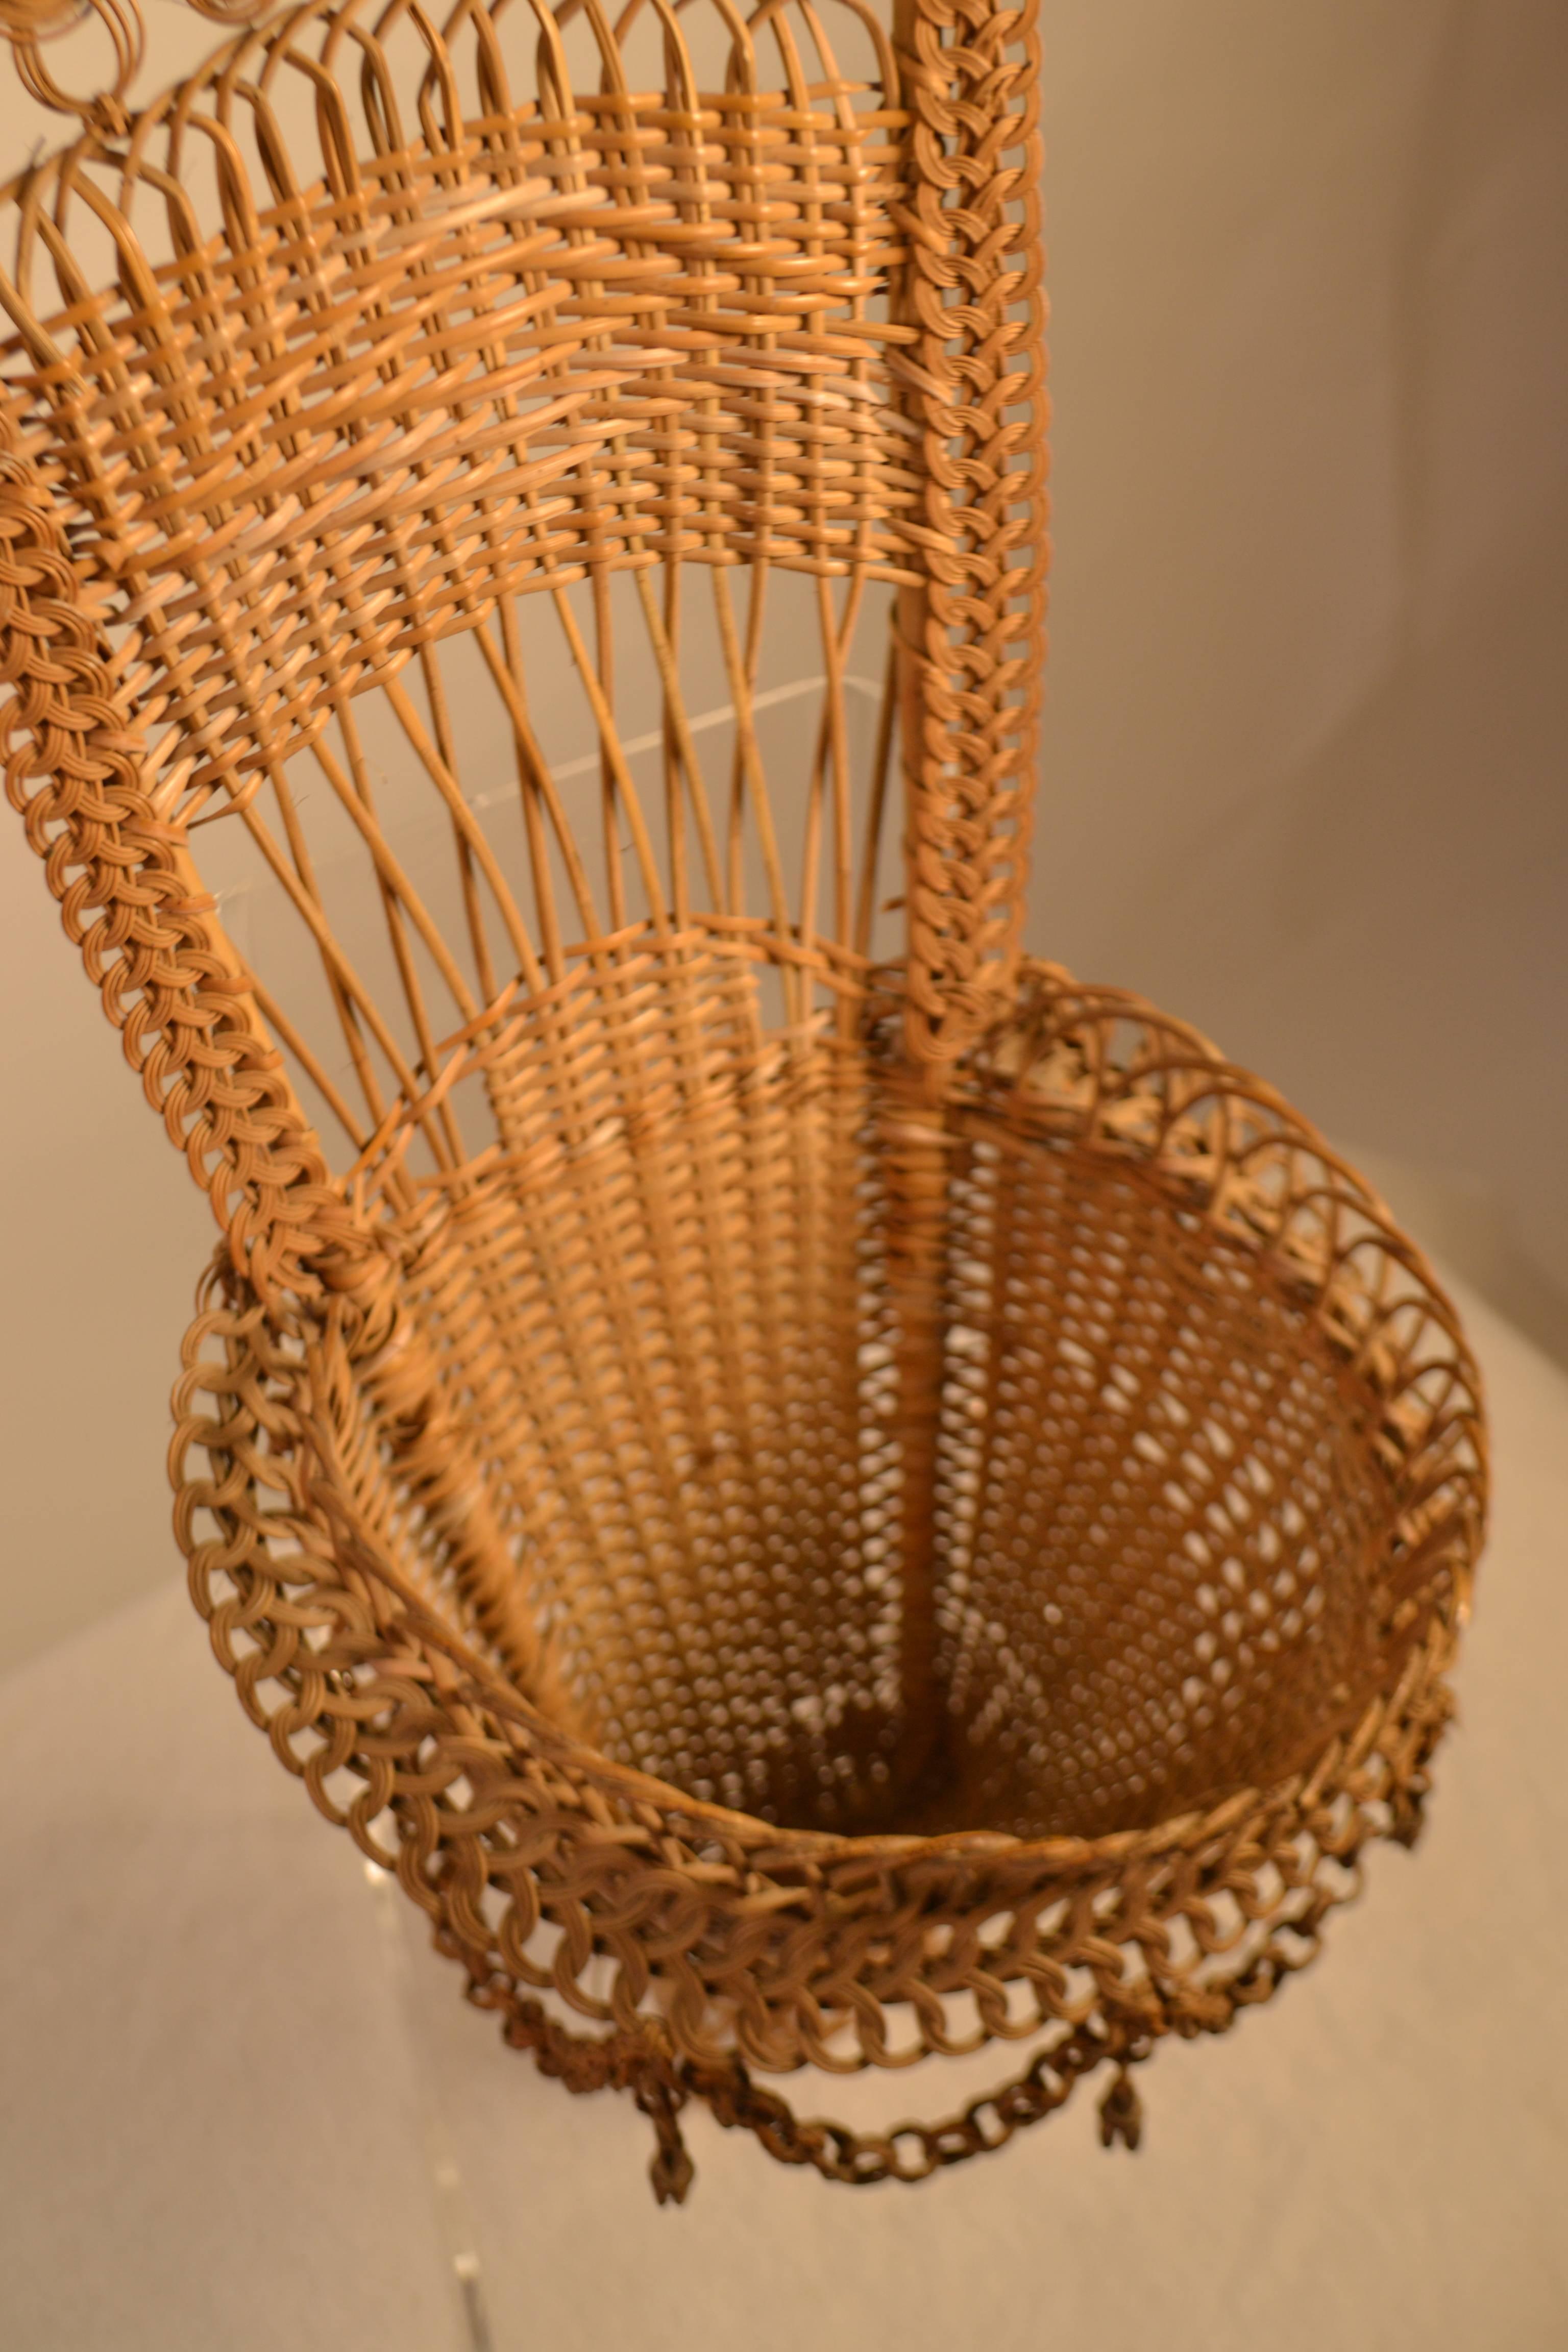 Handmade wicker work basket with chain loops and tassels. Bottom of basket does have wear and tear.